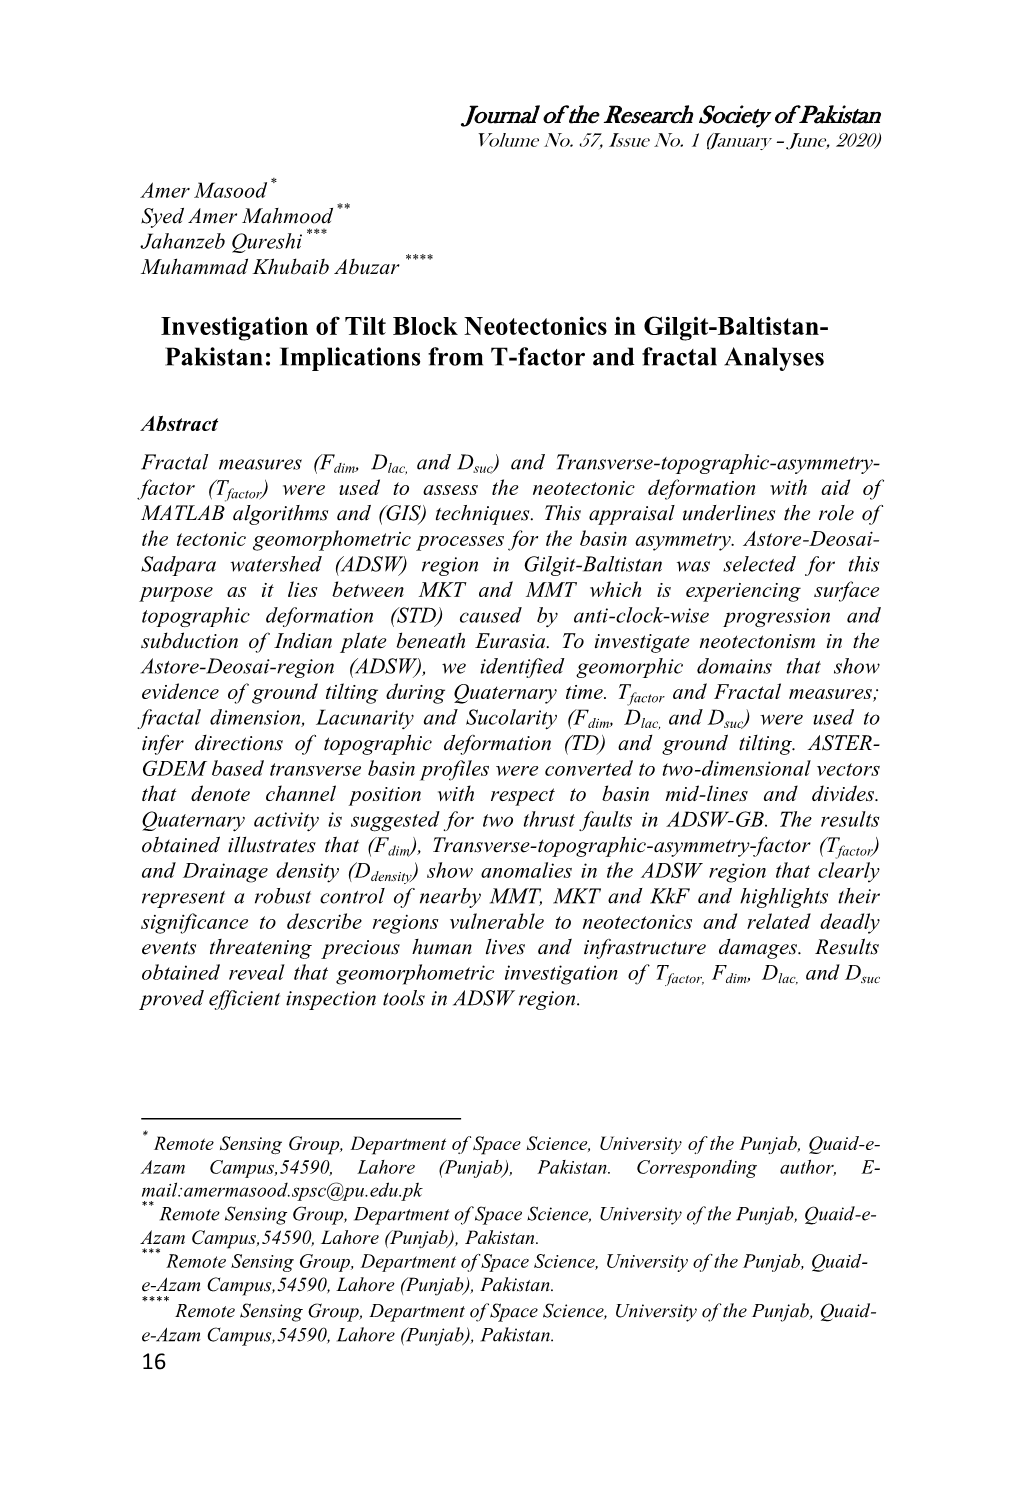 Investigation of Tilt Block Neotectonics in Gilgit-Baltistan- Pakistan: Implications from T-Factor and Fractal Analyses